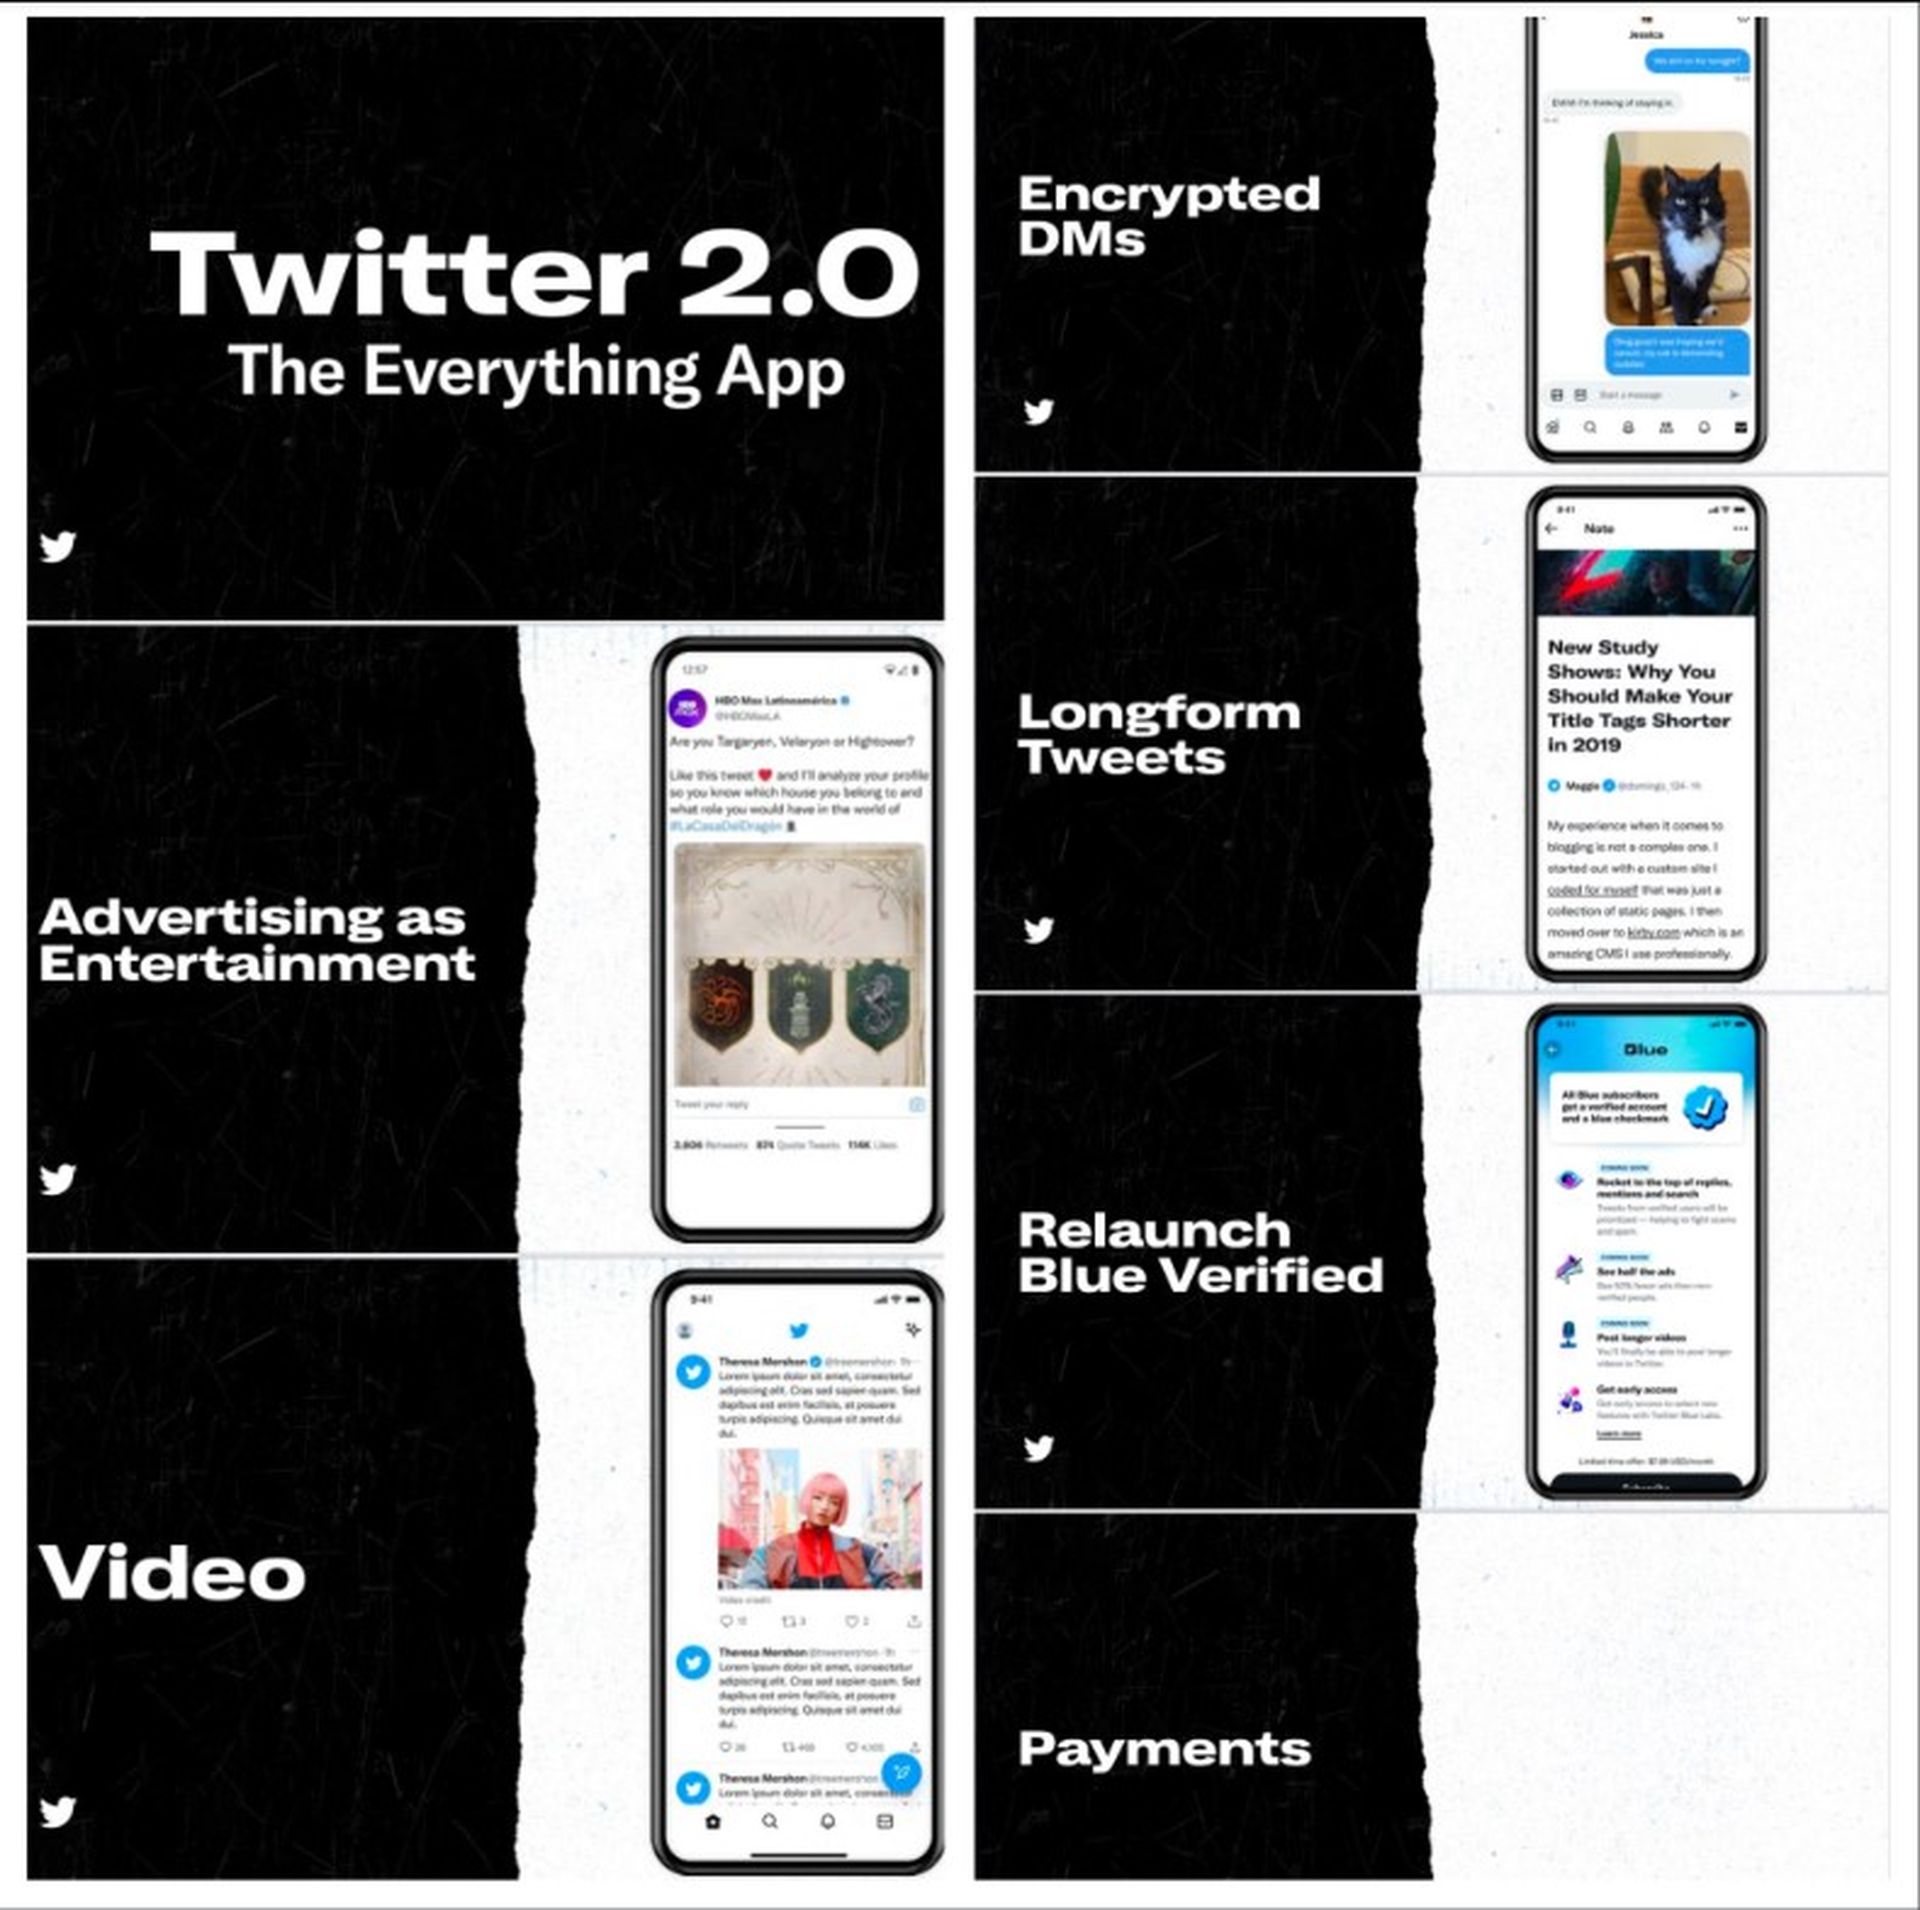 Twitter 2.0 features from Musk's tweet